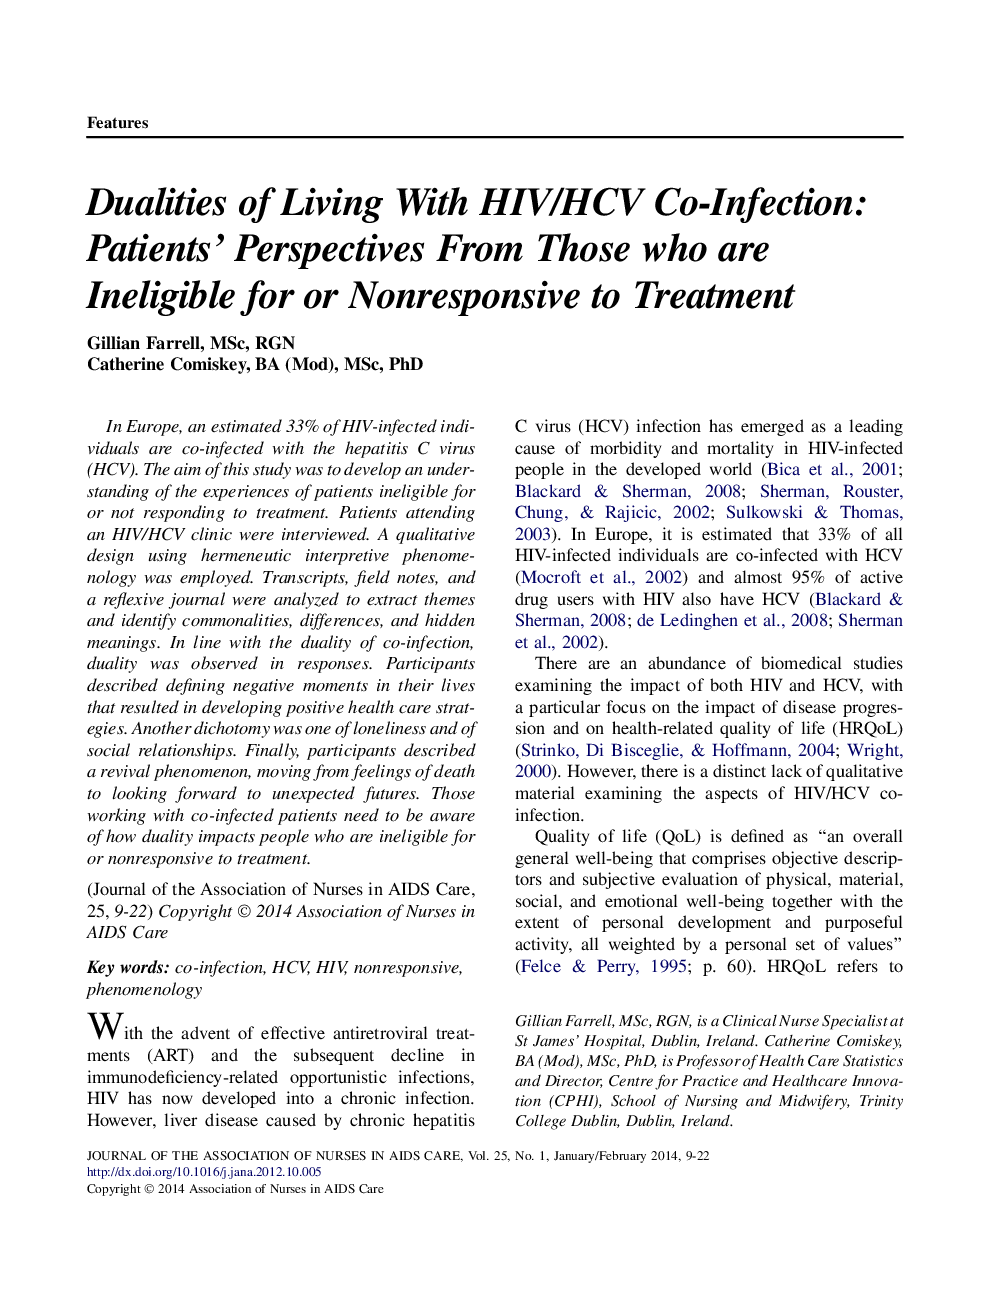 Dualities of Living With HIV/HCV Co-Infection: Patients' Perspectives From Those who are Ineligible for or Nonresponsive to Treatment